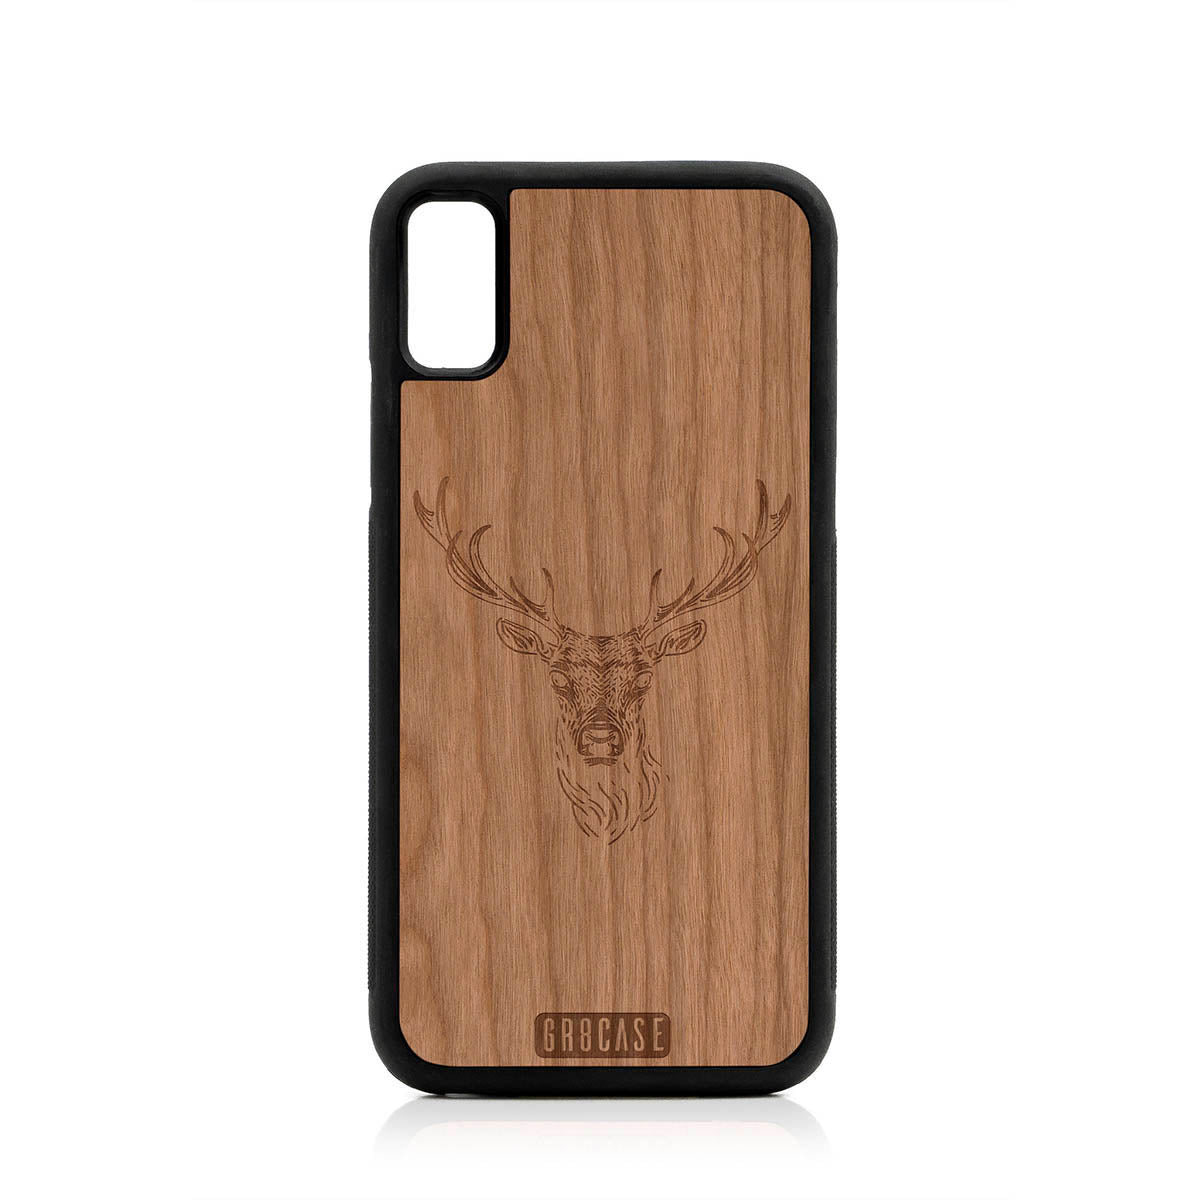 Elk Buck Design Wood Case For iPhone XS Max by GR8CASE